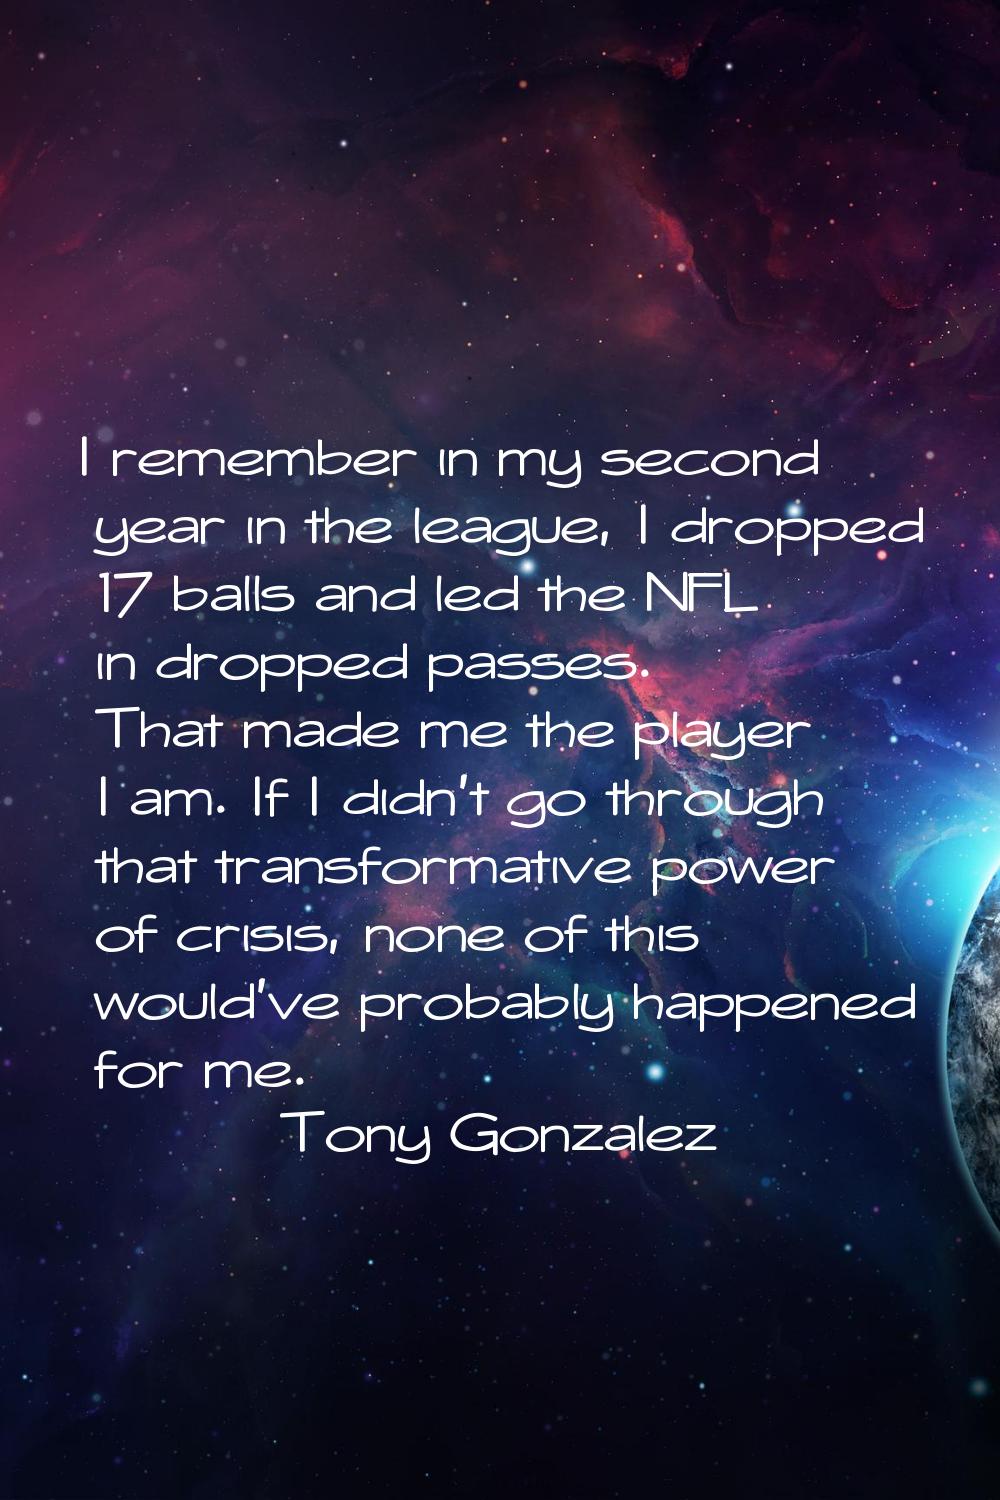 I remember in my second year in the league, I dropped 17 balls and led the NFL in dropped passes. T